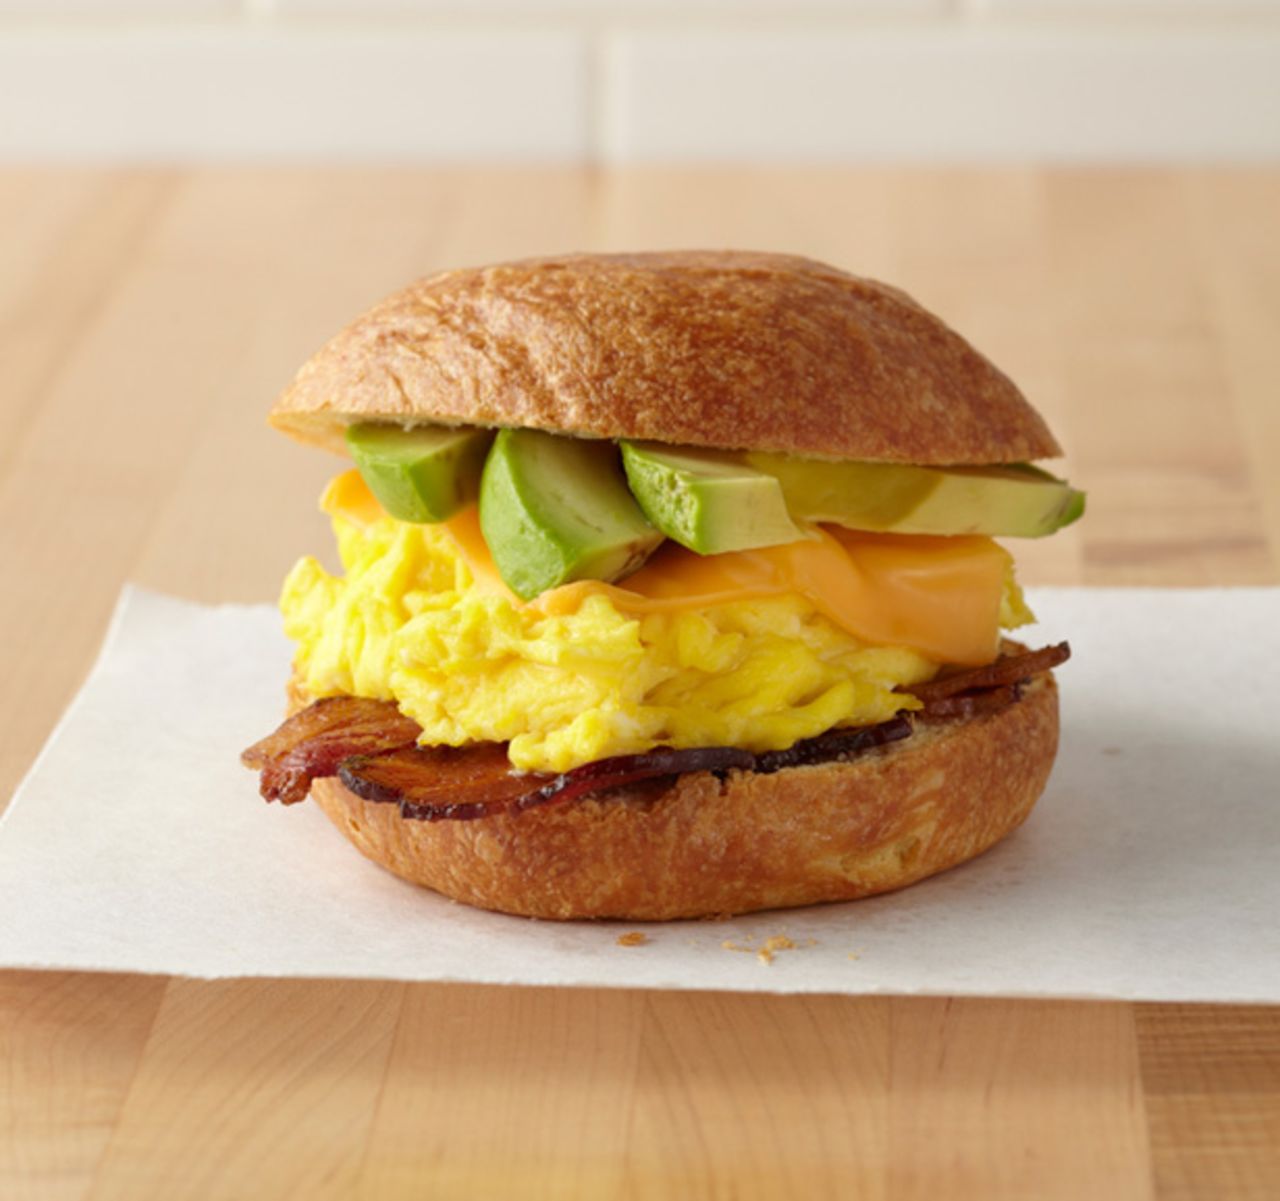 The egg sandwich at Food Network Kitchen in Terminal 3 at Fort Lauderdale International airport. The restaurant offers Florida-inspired dishes from 'grab-and-go' and 'made-to-order' menus as well as Guy Fieri and co. on TVs all day.